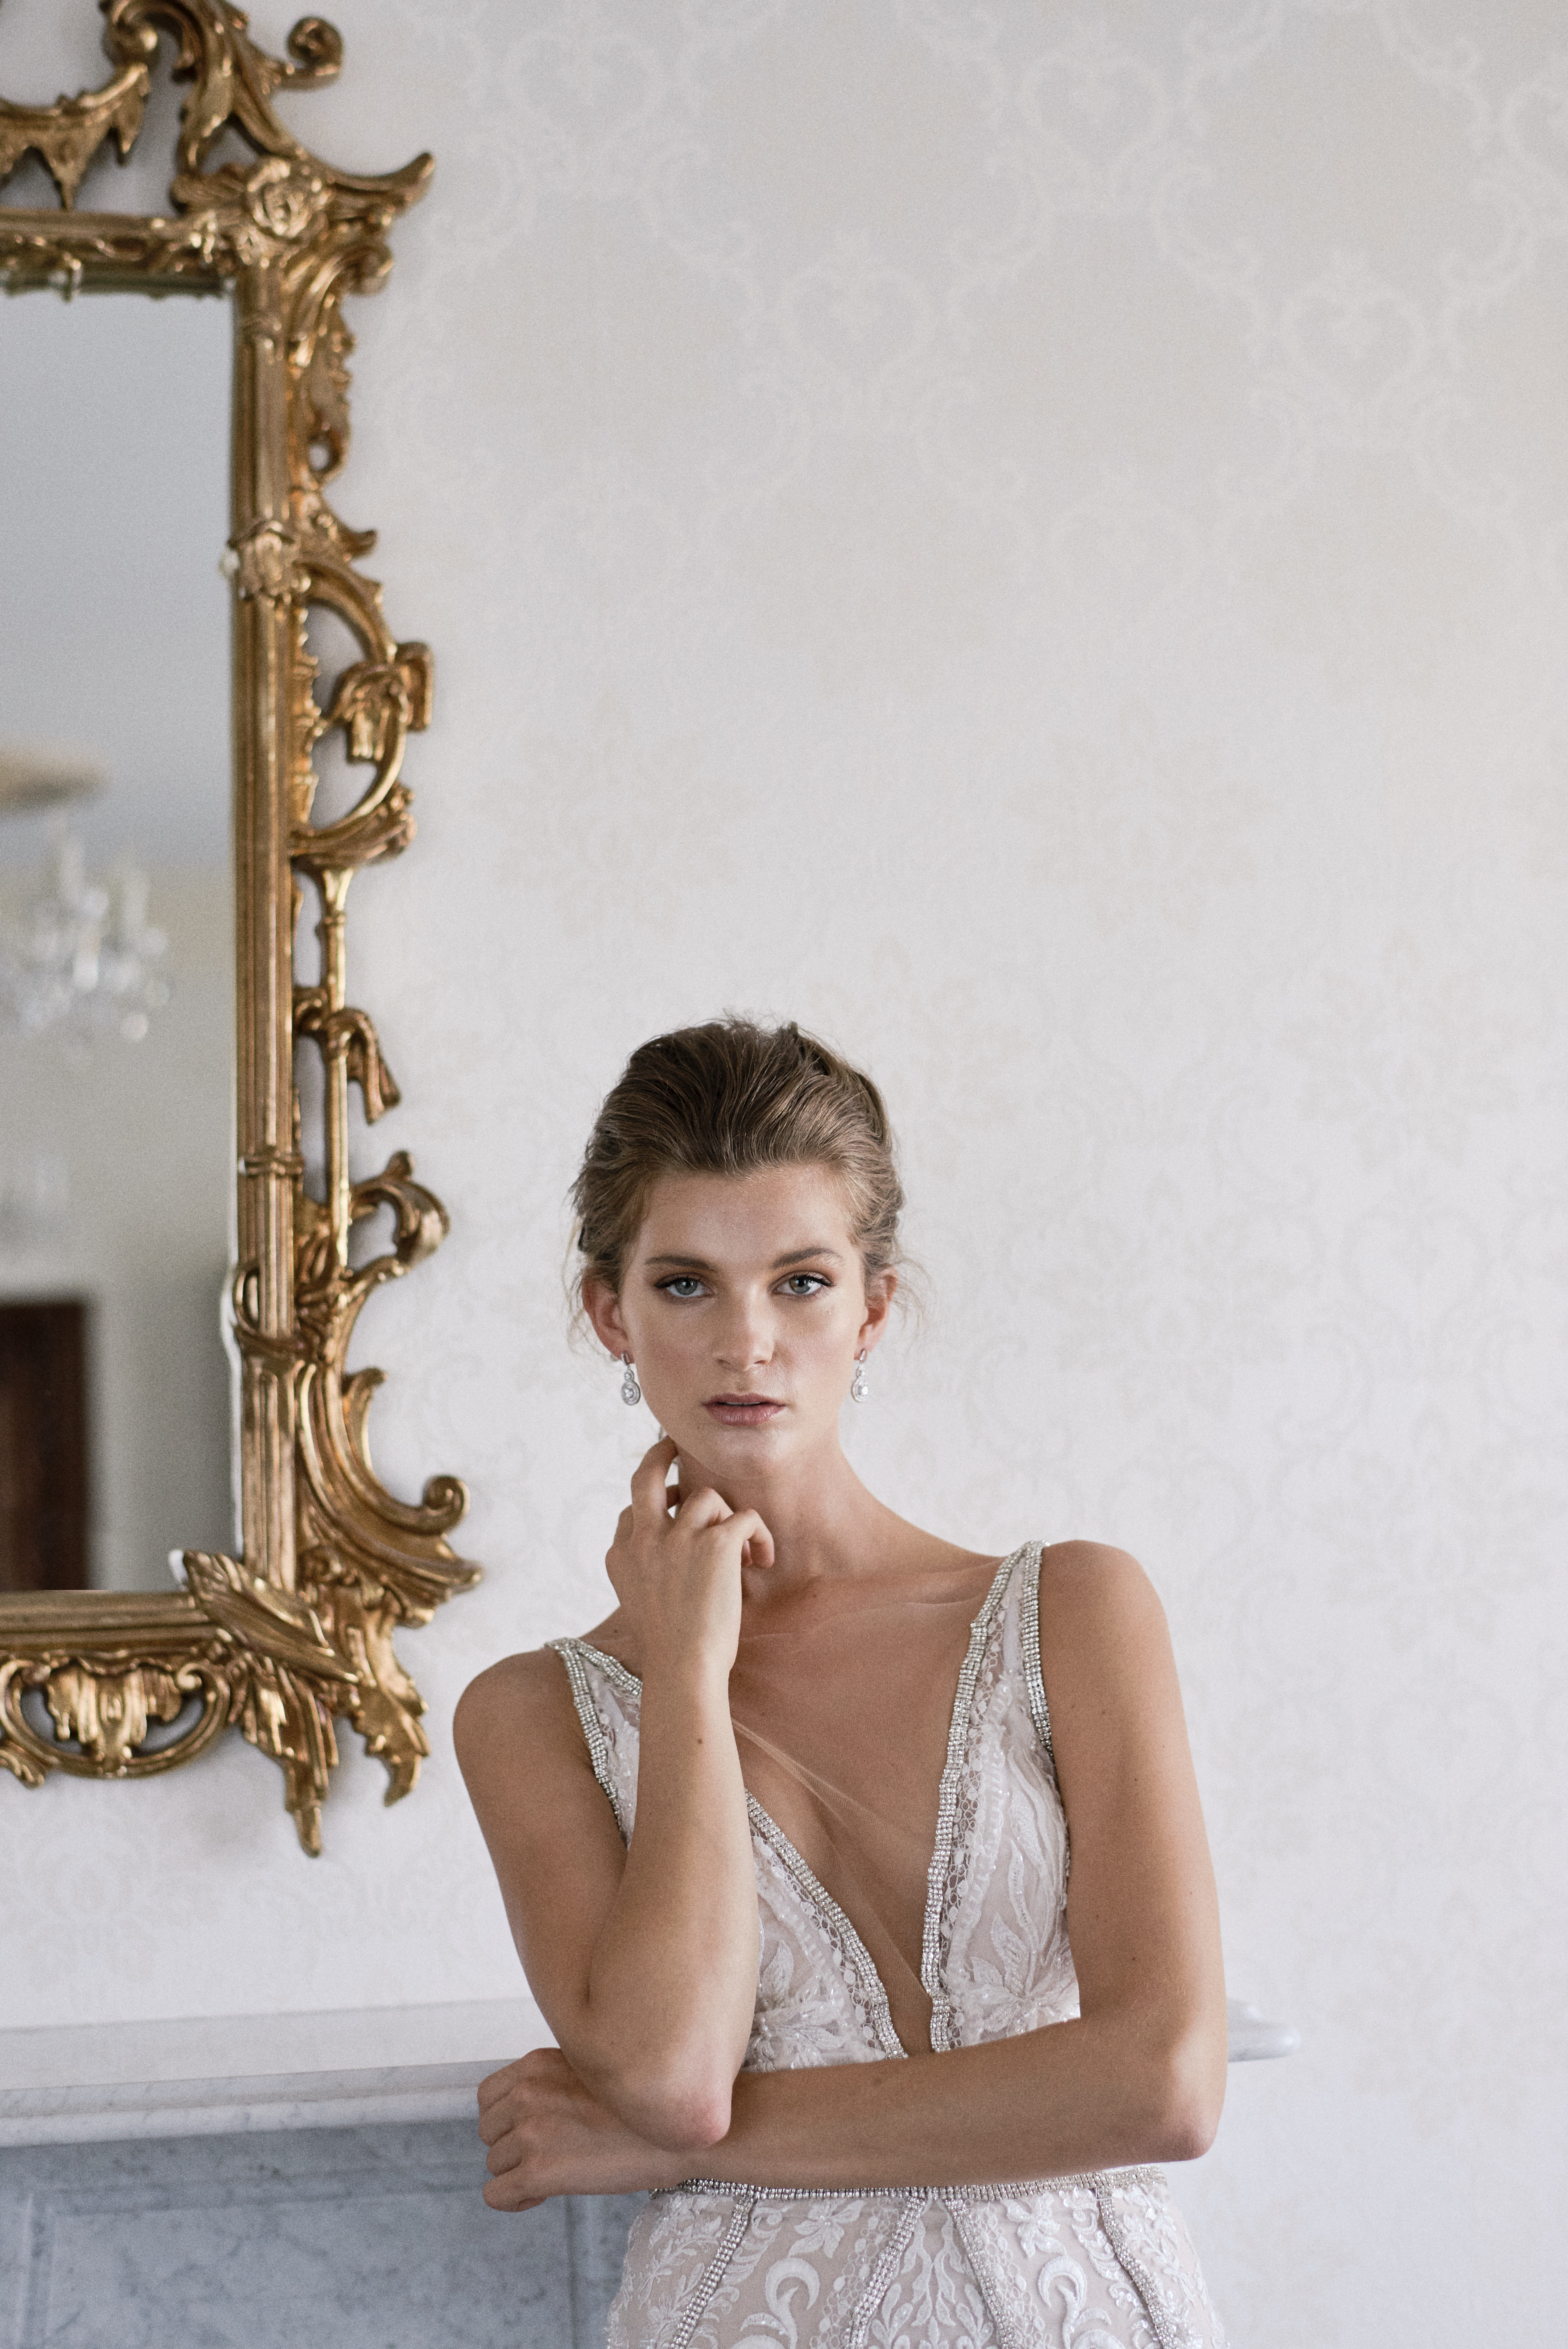 Pre-Wedding Preparation at Windsor Hotel with Uber Chic Bridal Gowns and Regal Accessories